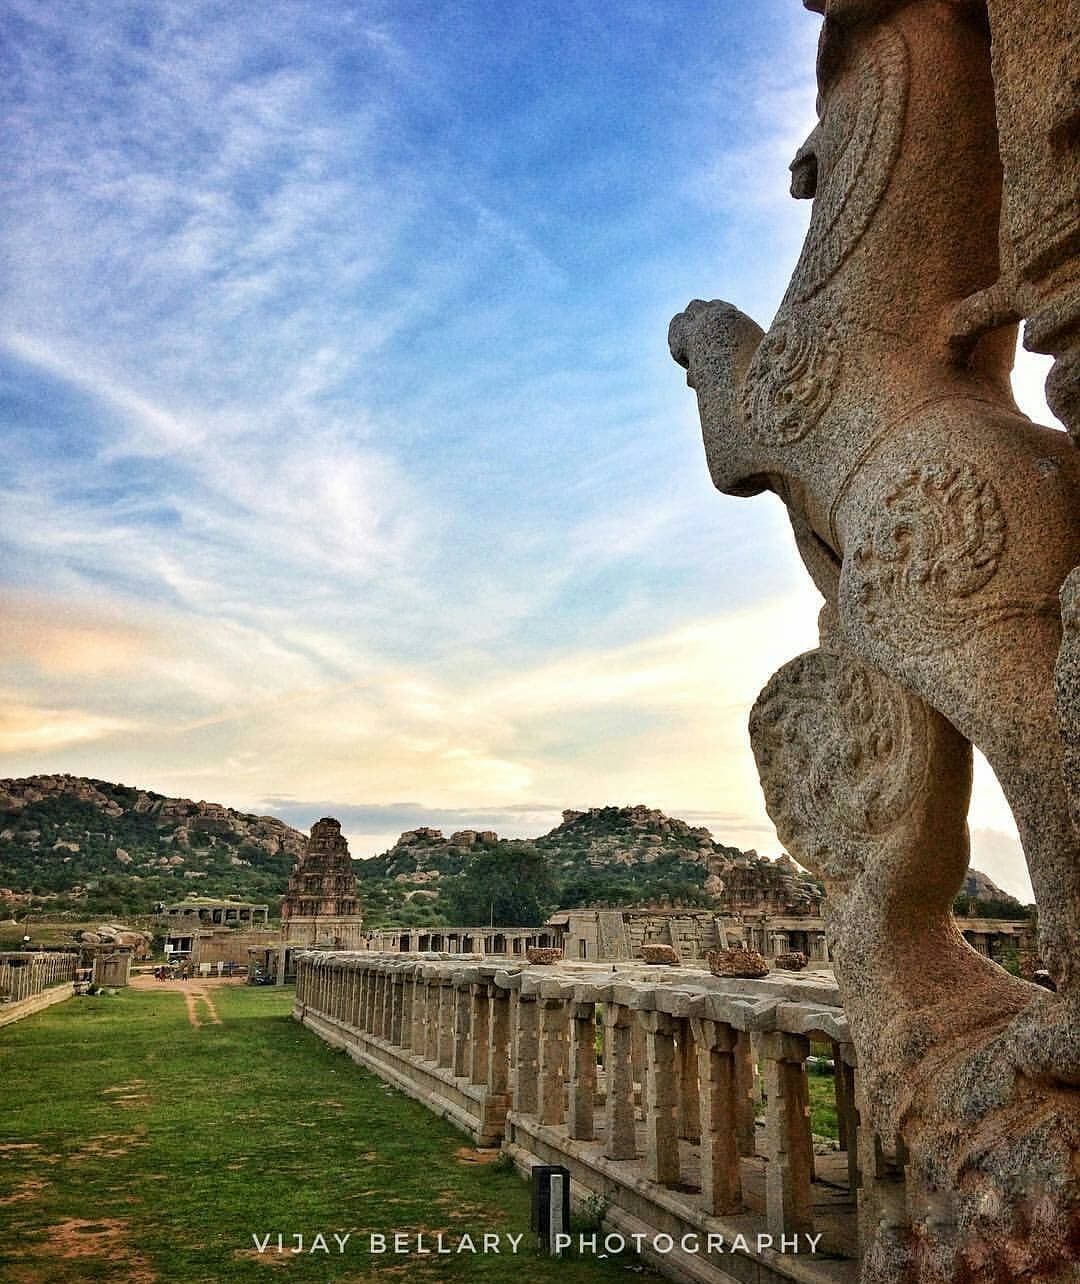 Pics Of The Magnificent Ancient City Of Hampi That'll Put It On Top Of Your Travel Bucket List